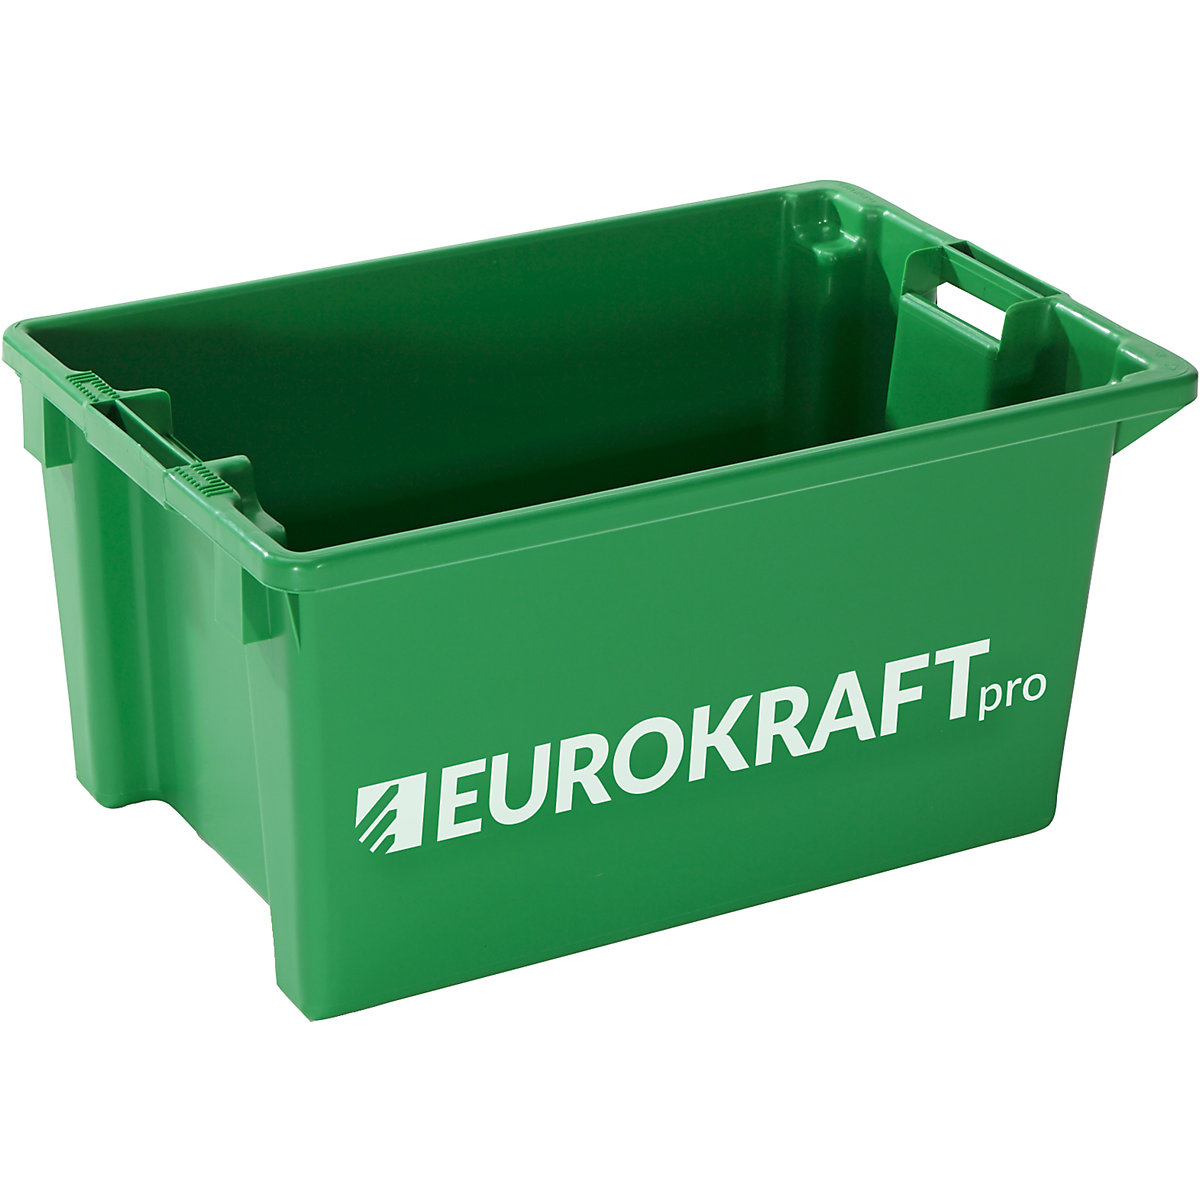 EUROKRAFTpro – Stack/nest container, capacity 50 l, pack of 3, green